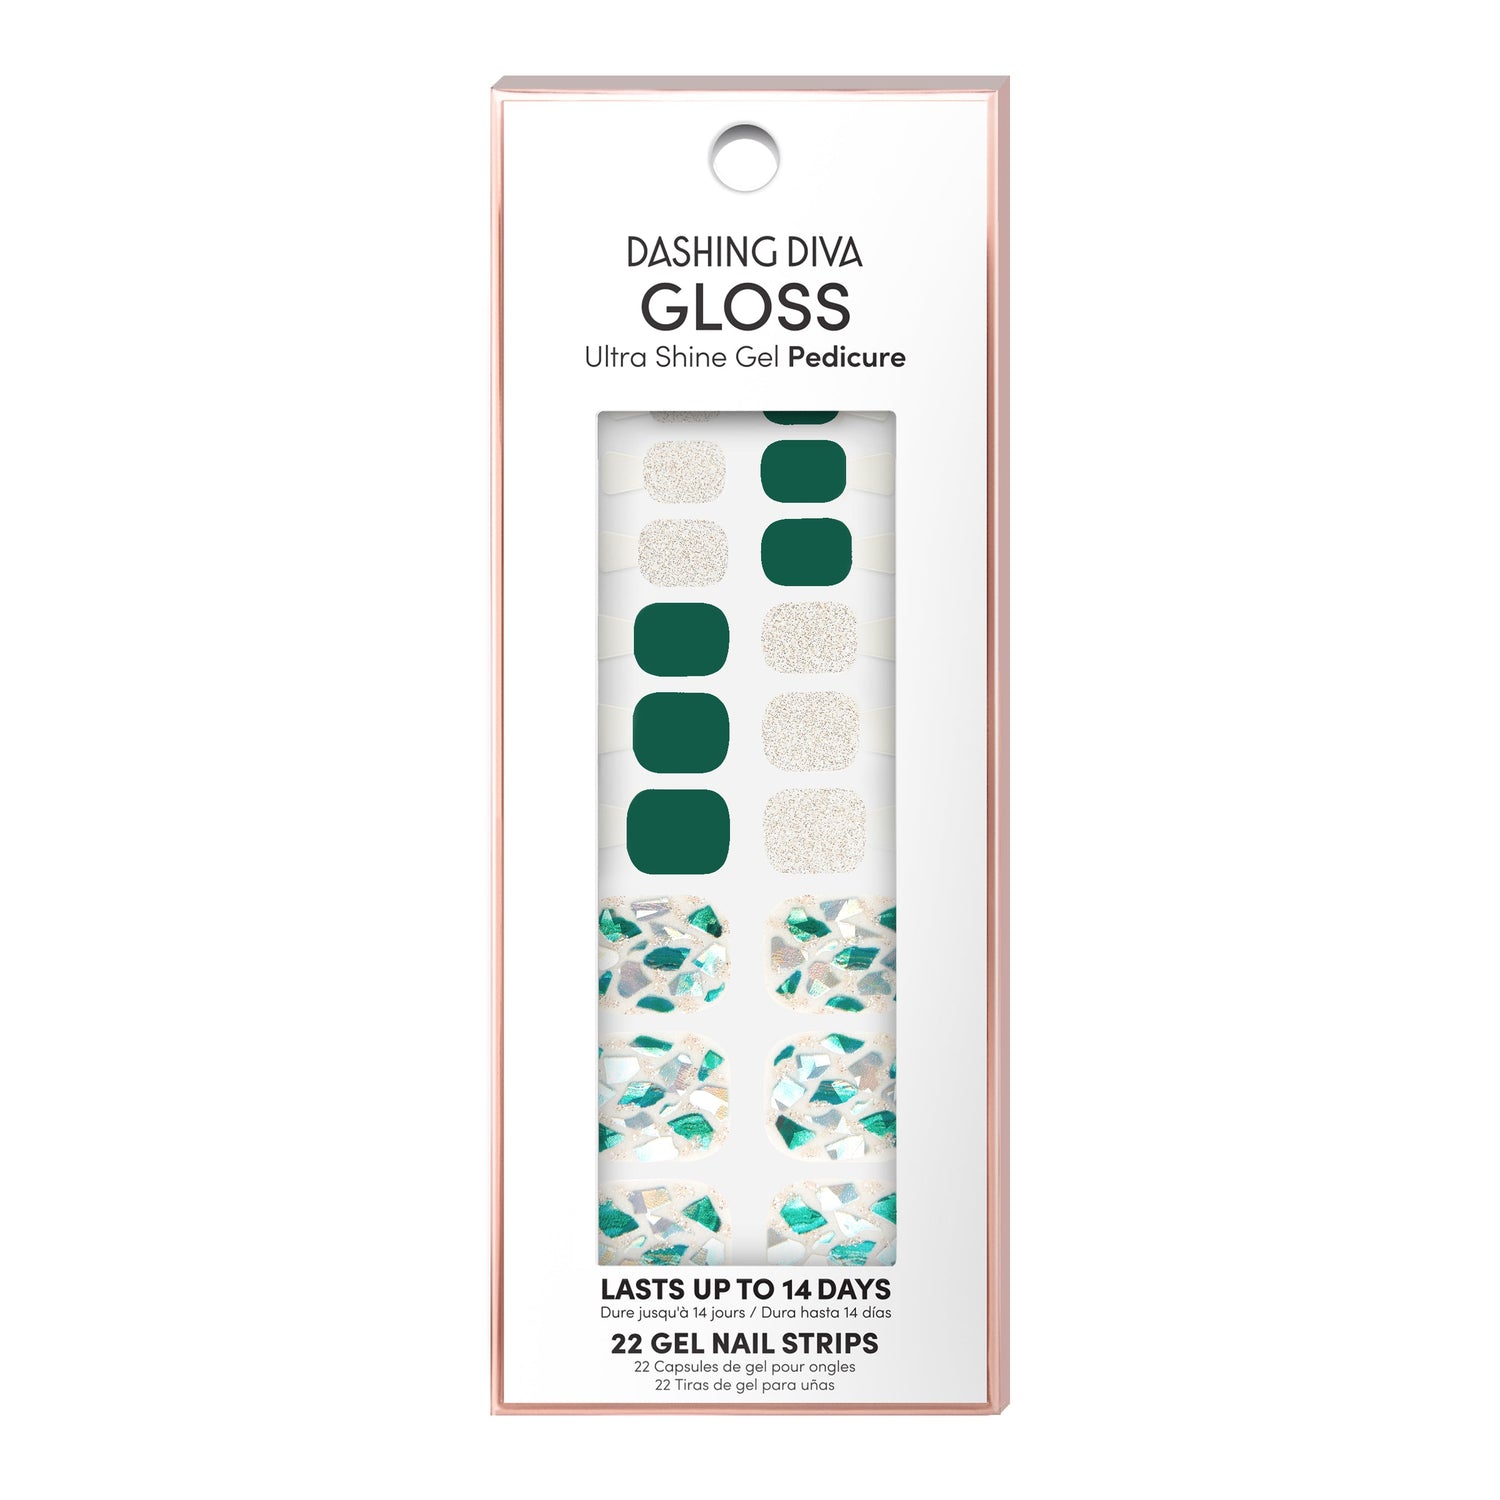 Dashing Diva GLOSS Pedicure emerald green gel pedi strips with off-white silver glittered accent nails and shattered glass mosaic.